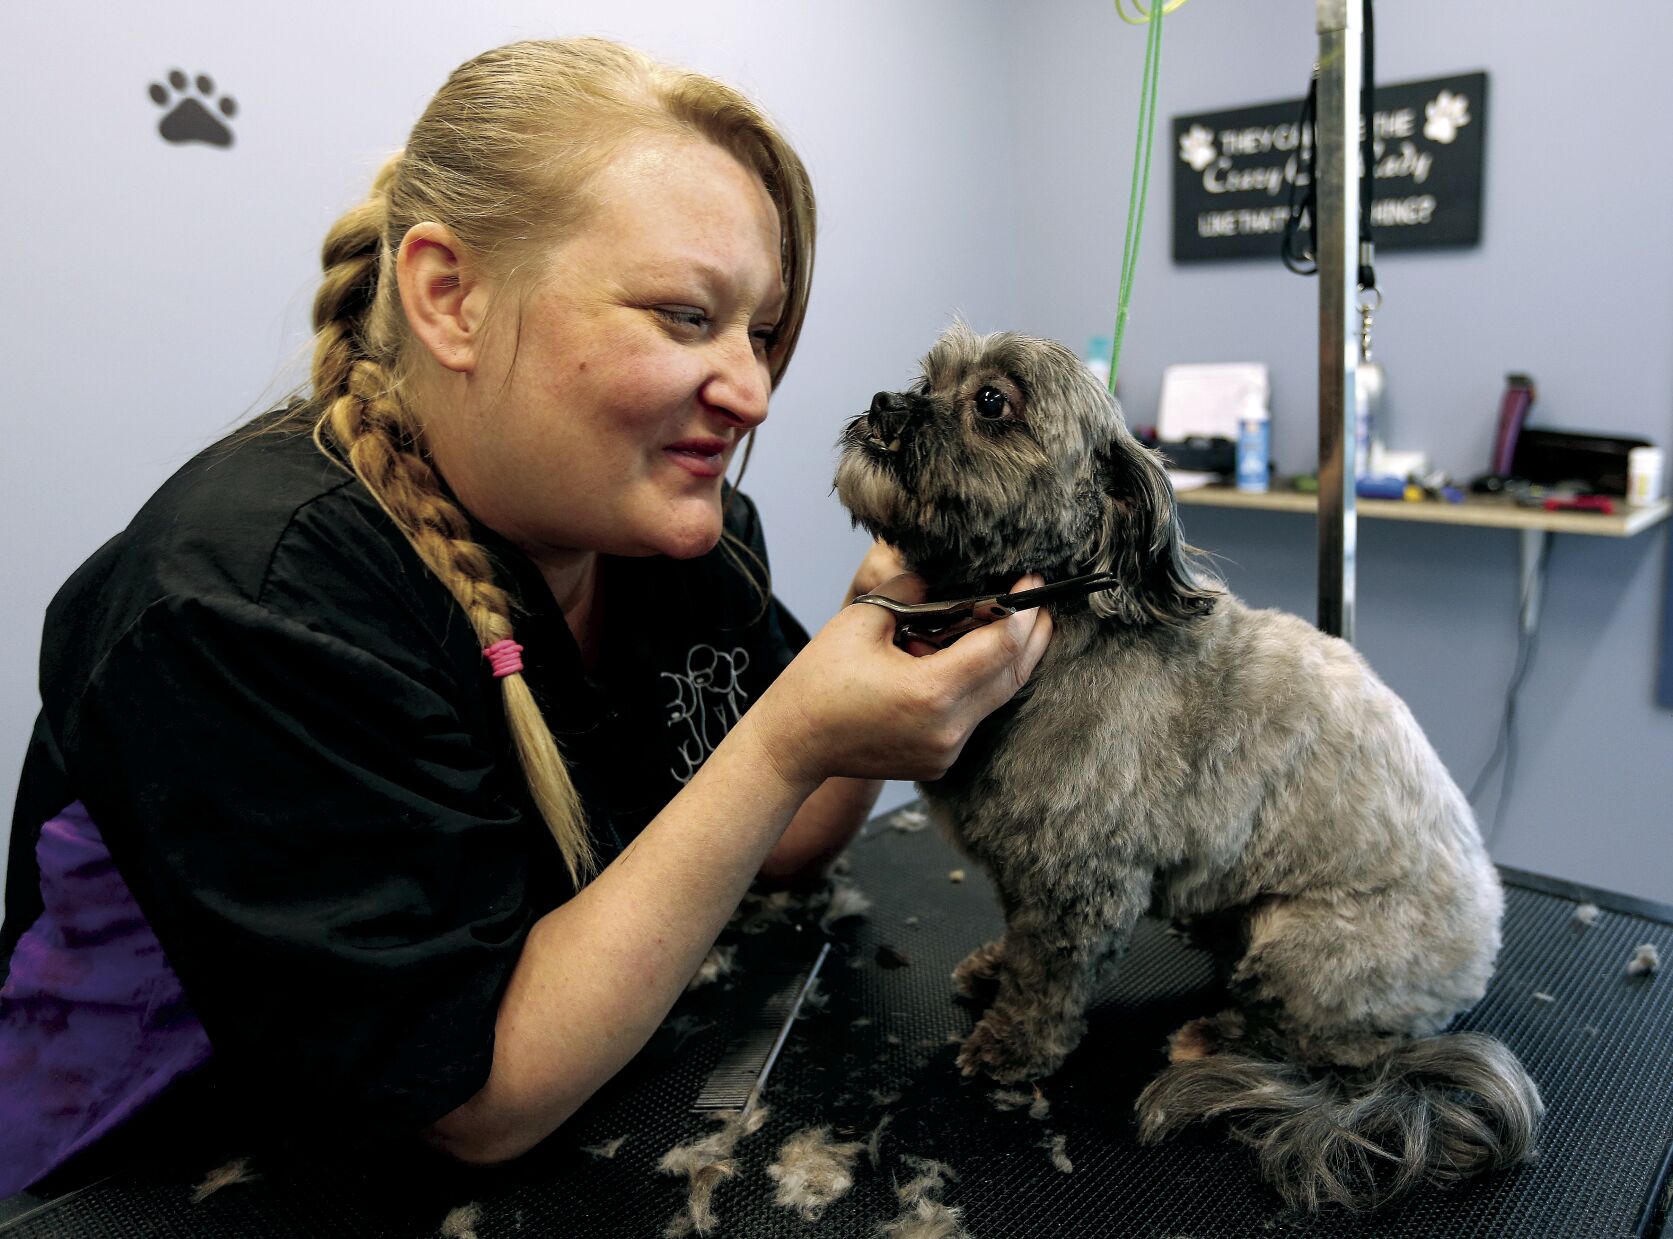 Nikki Hargrove, co-owner of F.U.R. On 14th, works on grooming a dog last week.    PHOTO CREDIT: Dave Kettering